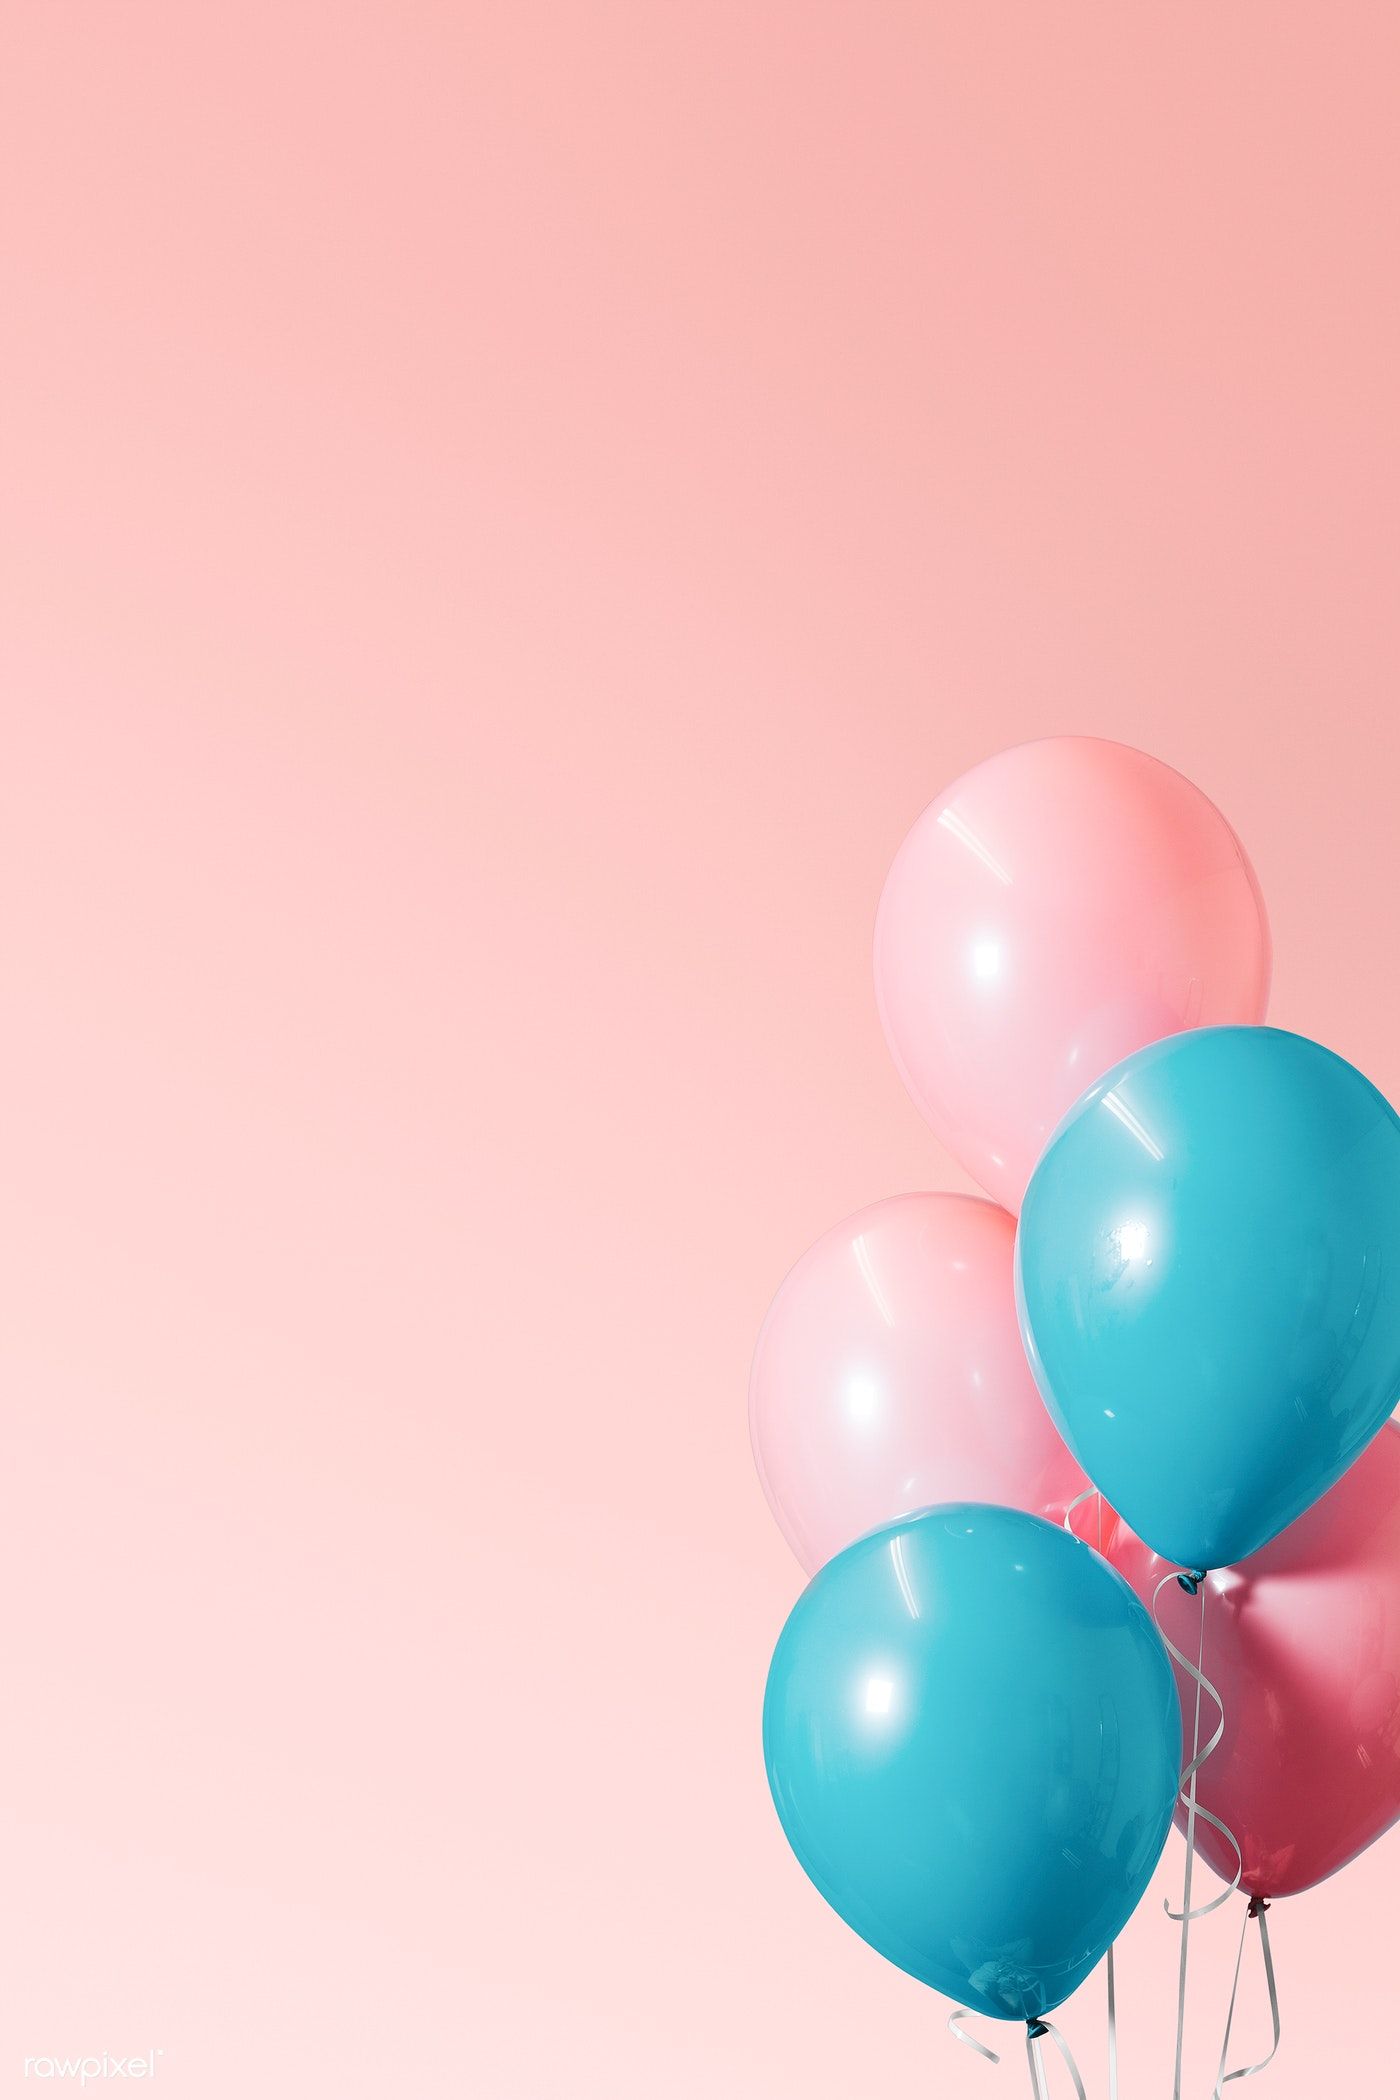 Download premium illustration of Pink and blue balloons poster